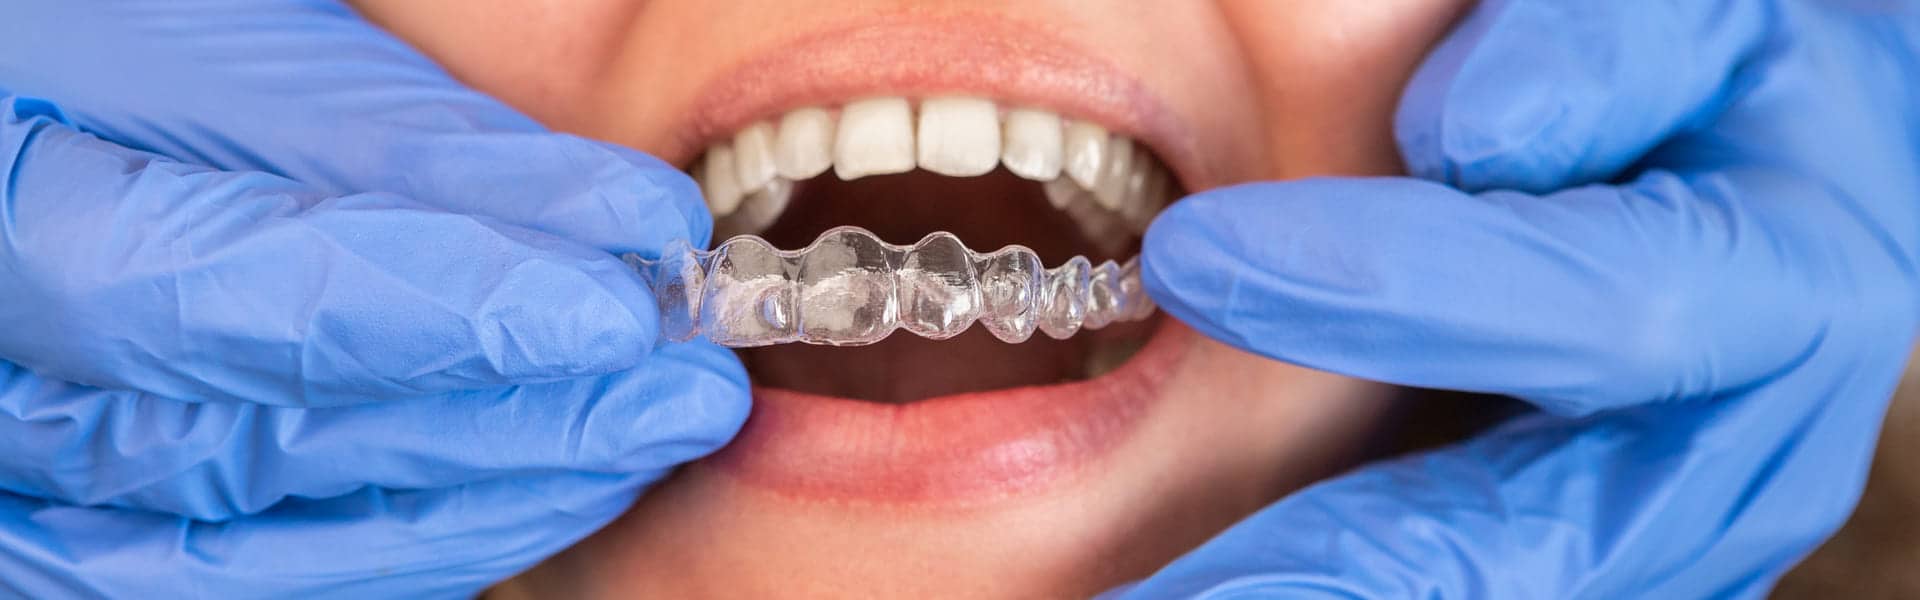 The Ultimate Guide to Invisalign Braces: Pros and Cons Uncovered